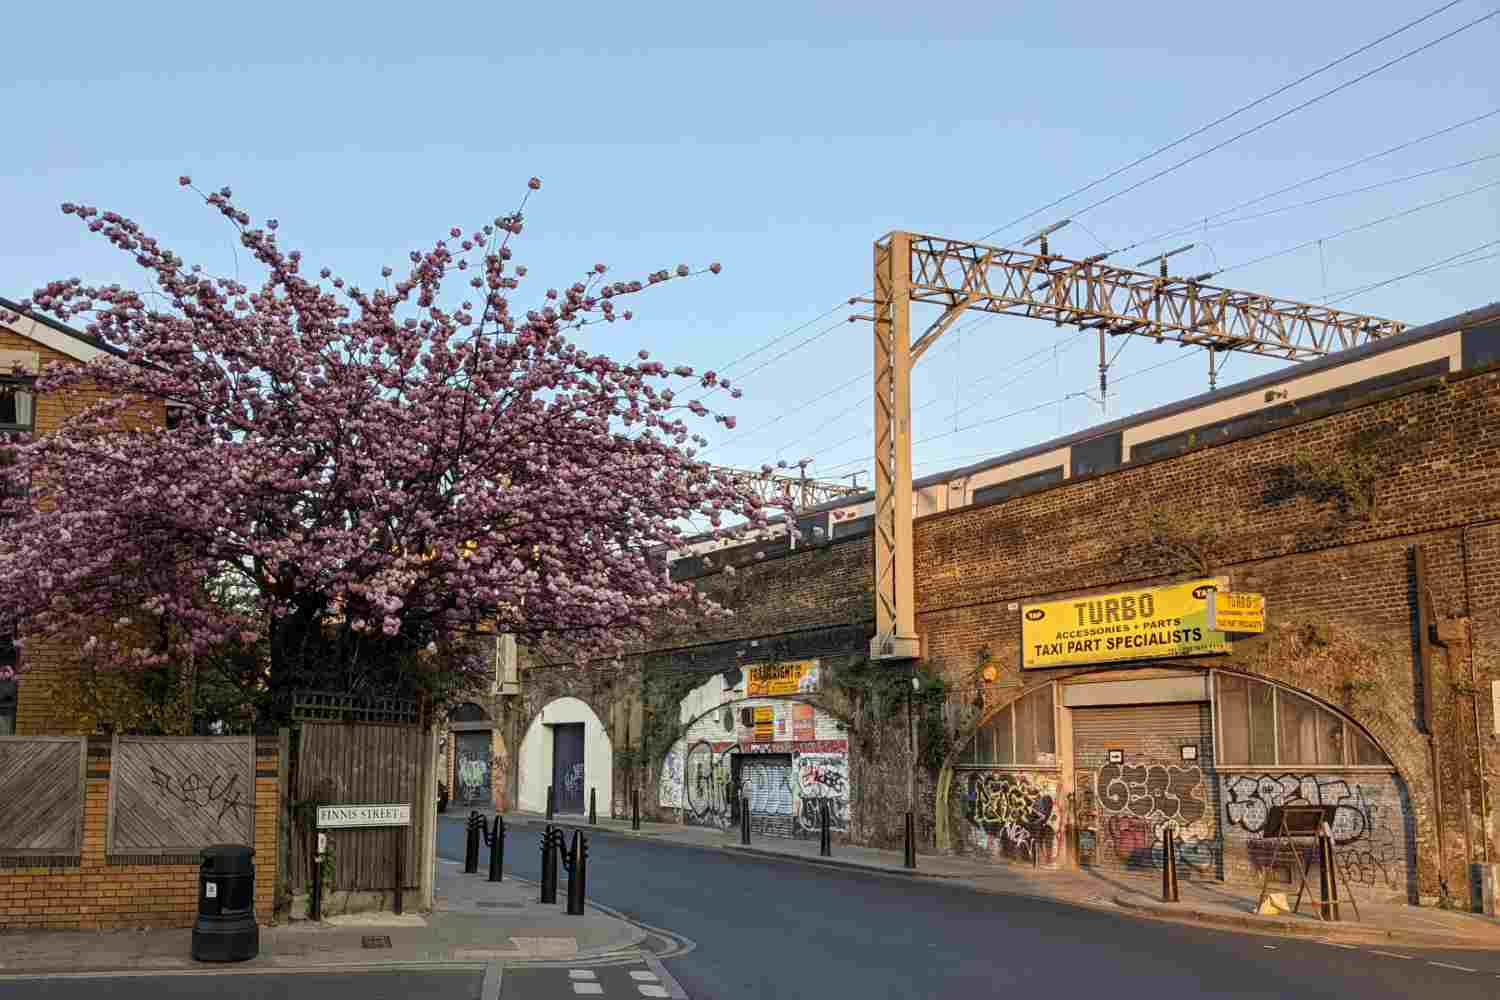 One of the railway arches with a blossom tree in front